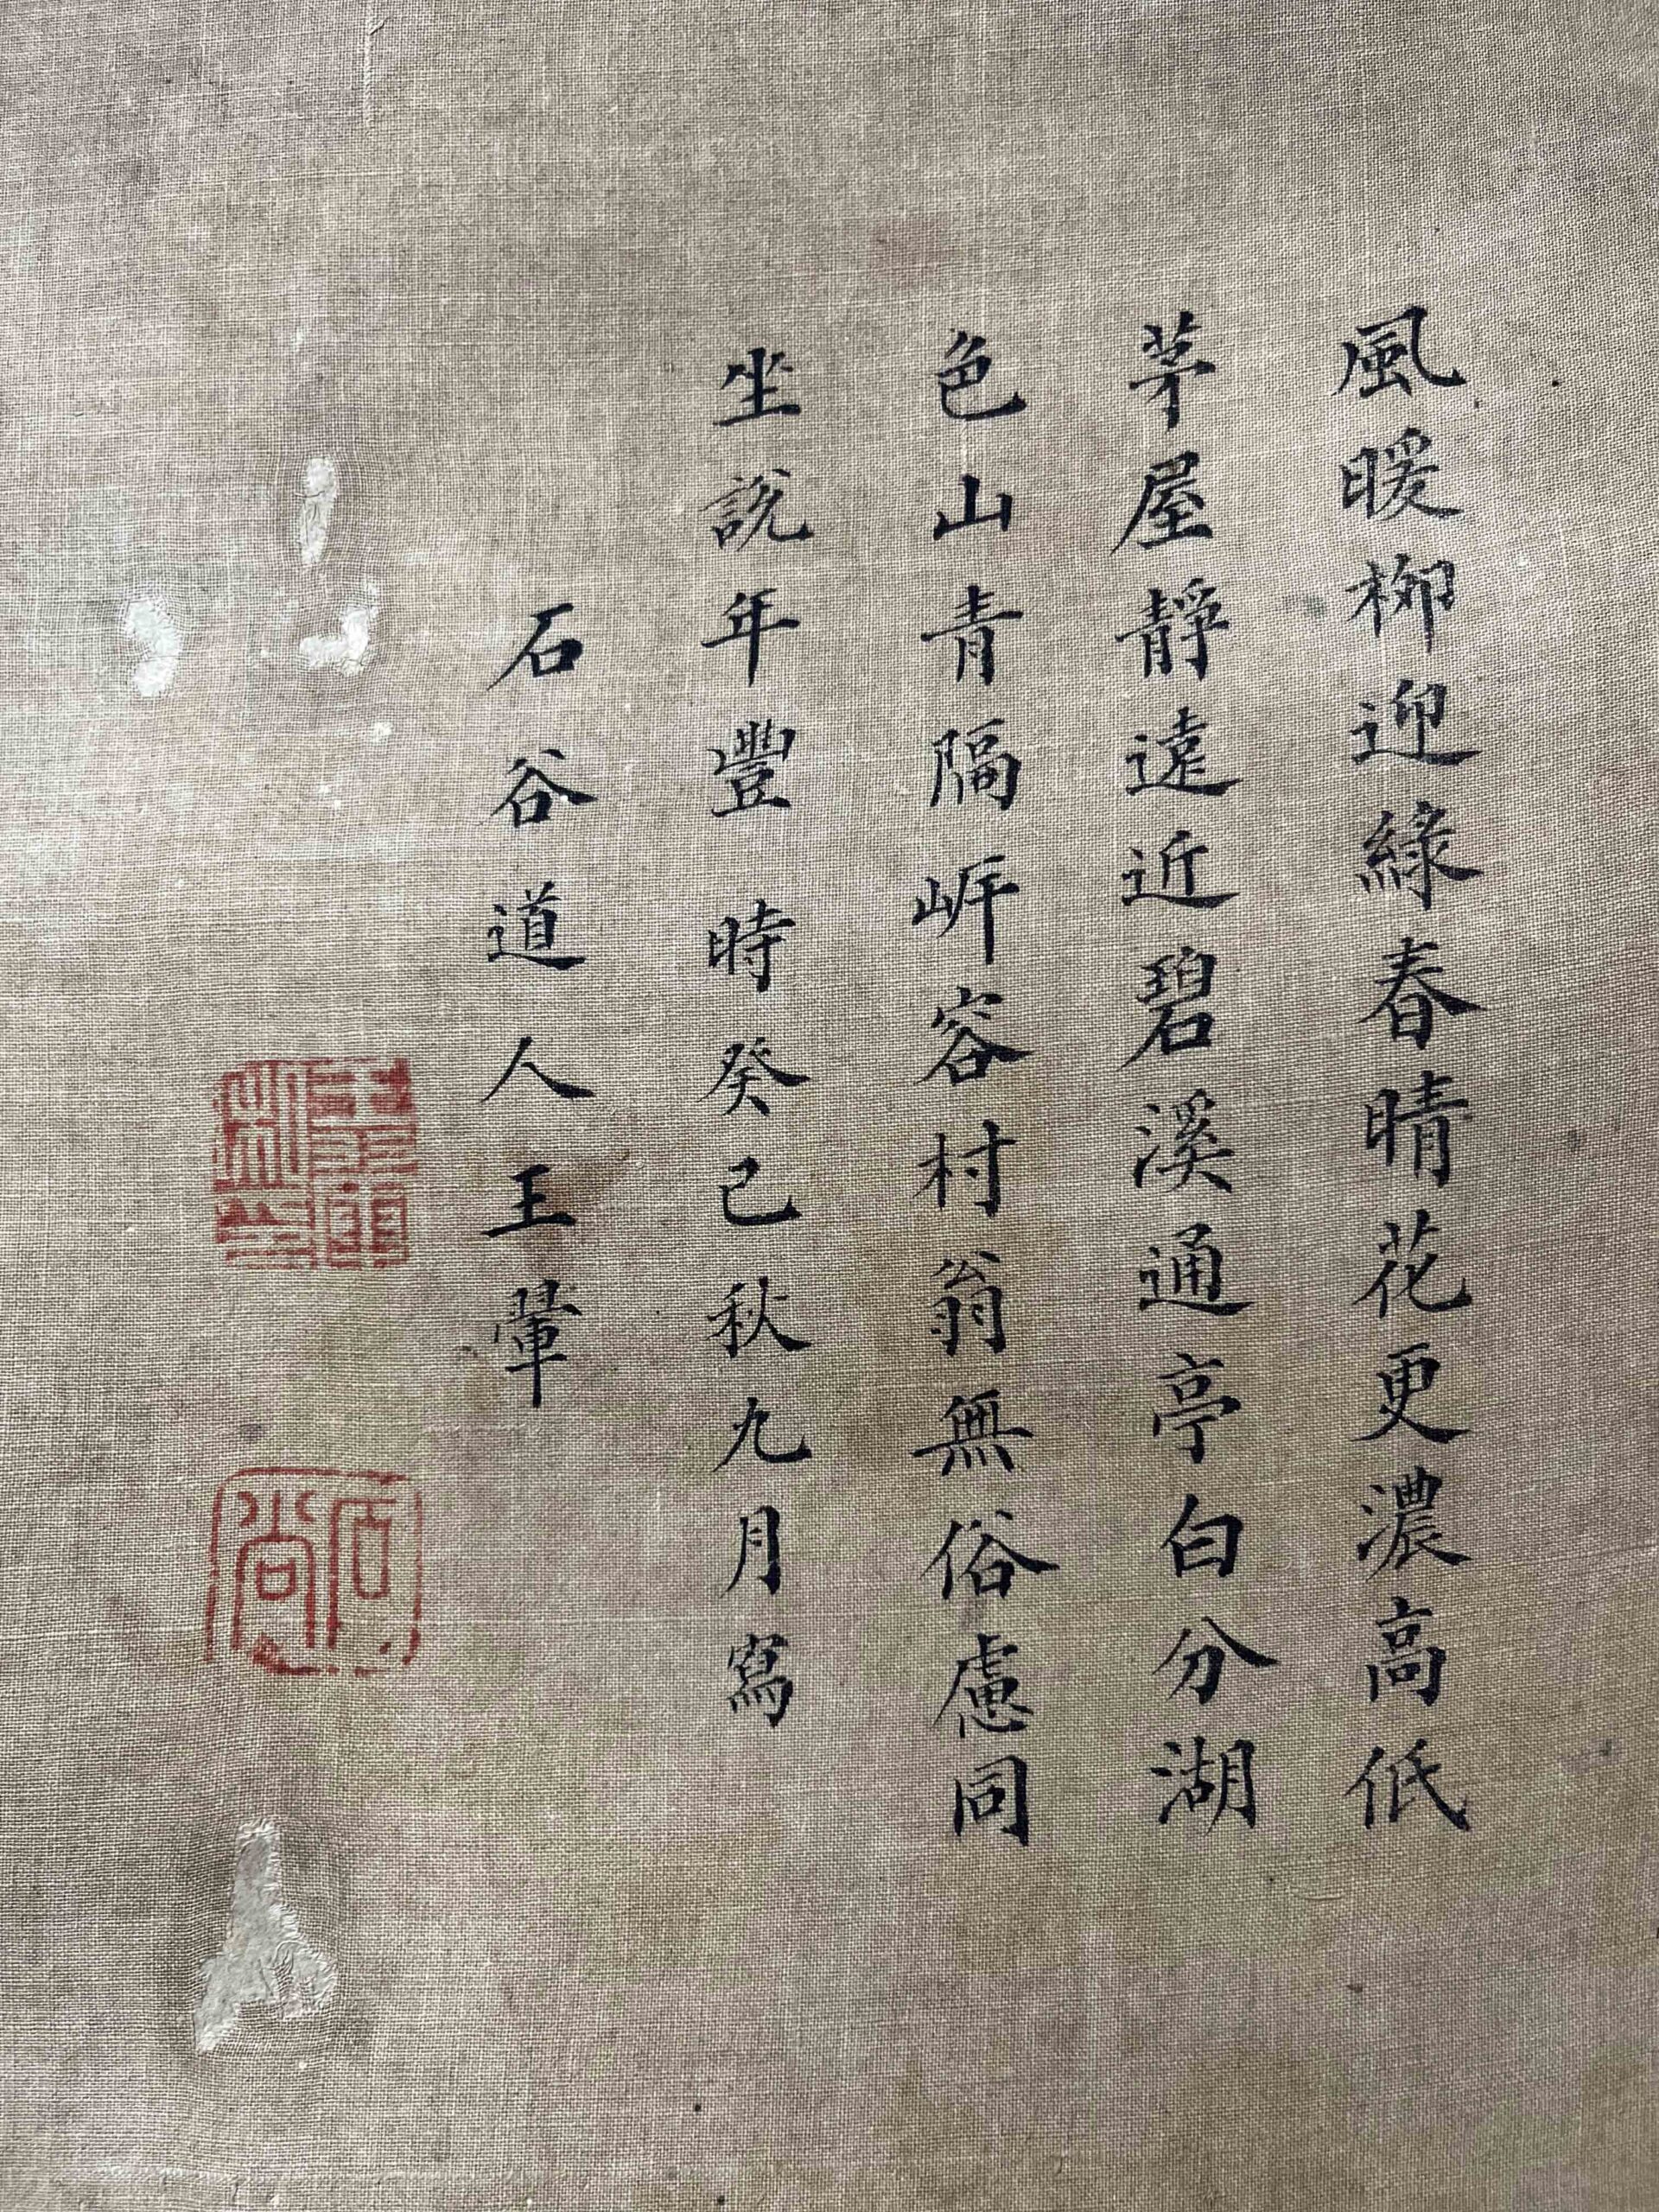 Landscape Painting by Wang Shigu of Early Qing Dynasty青绿山水天 